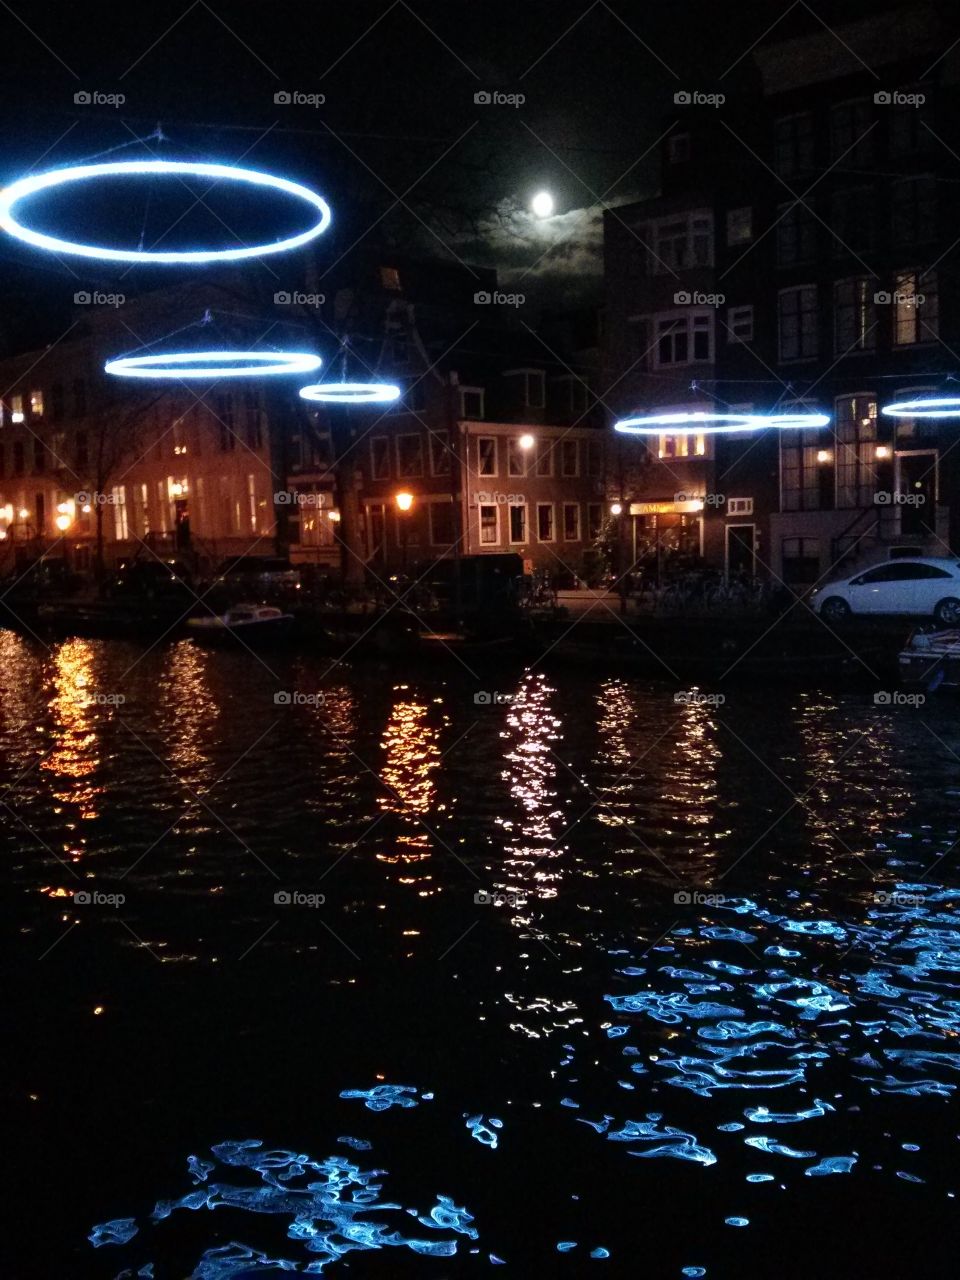 Reflections in moonlight over Amsterdam canals